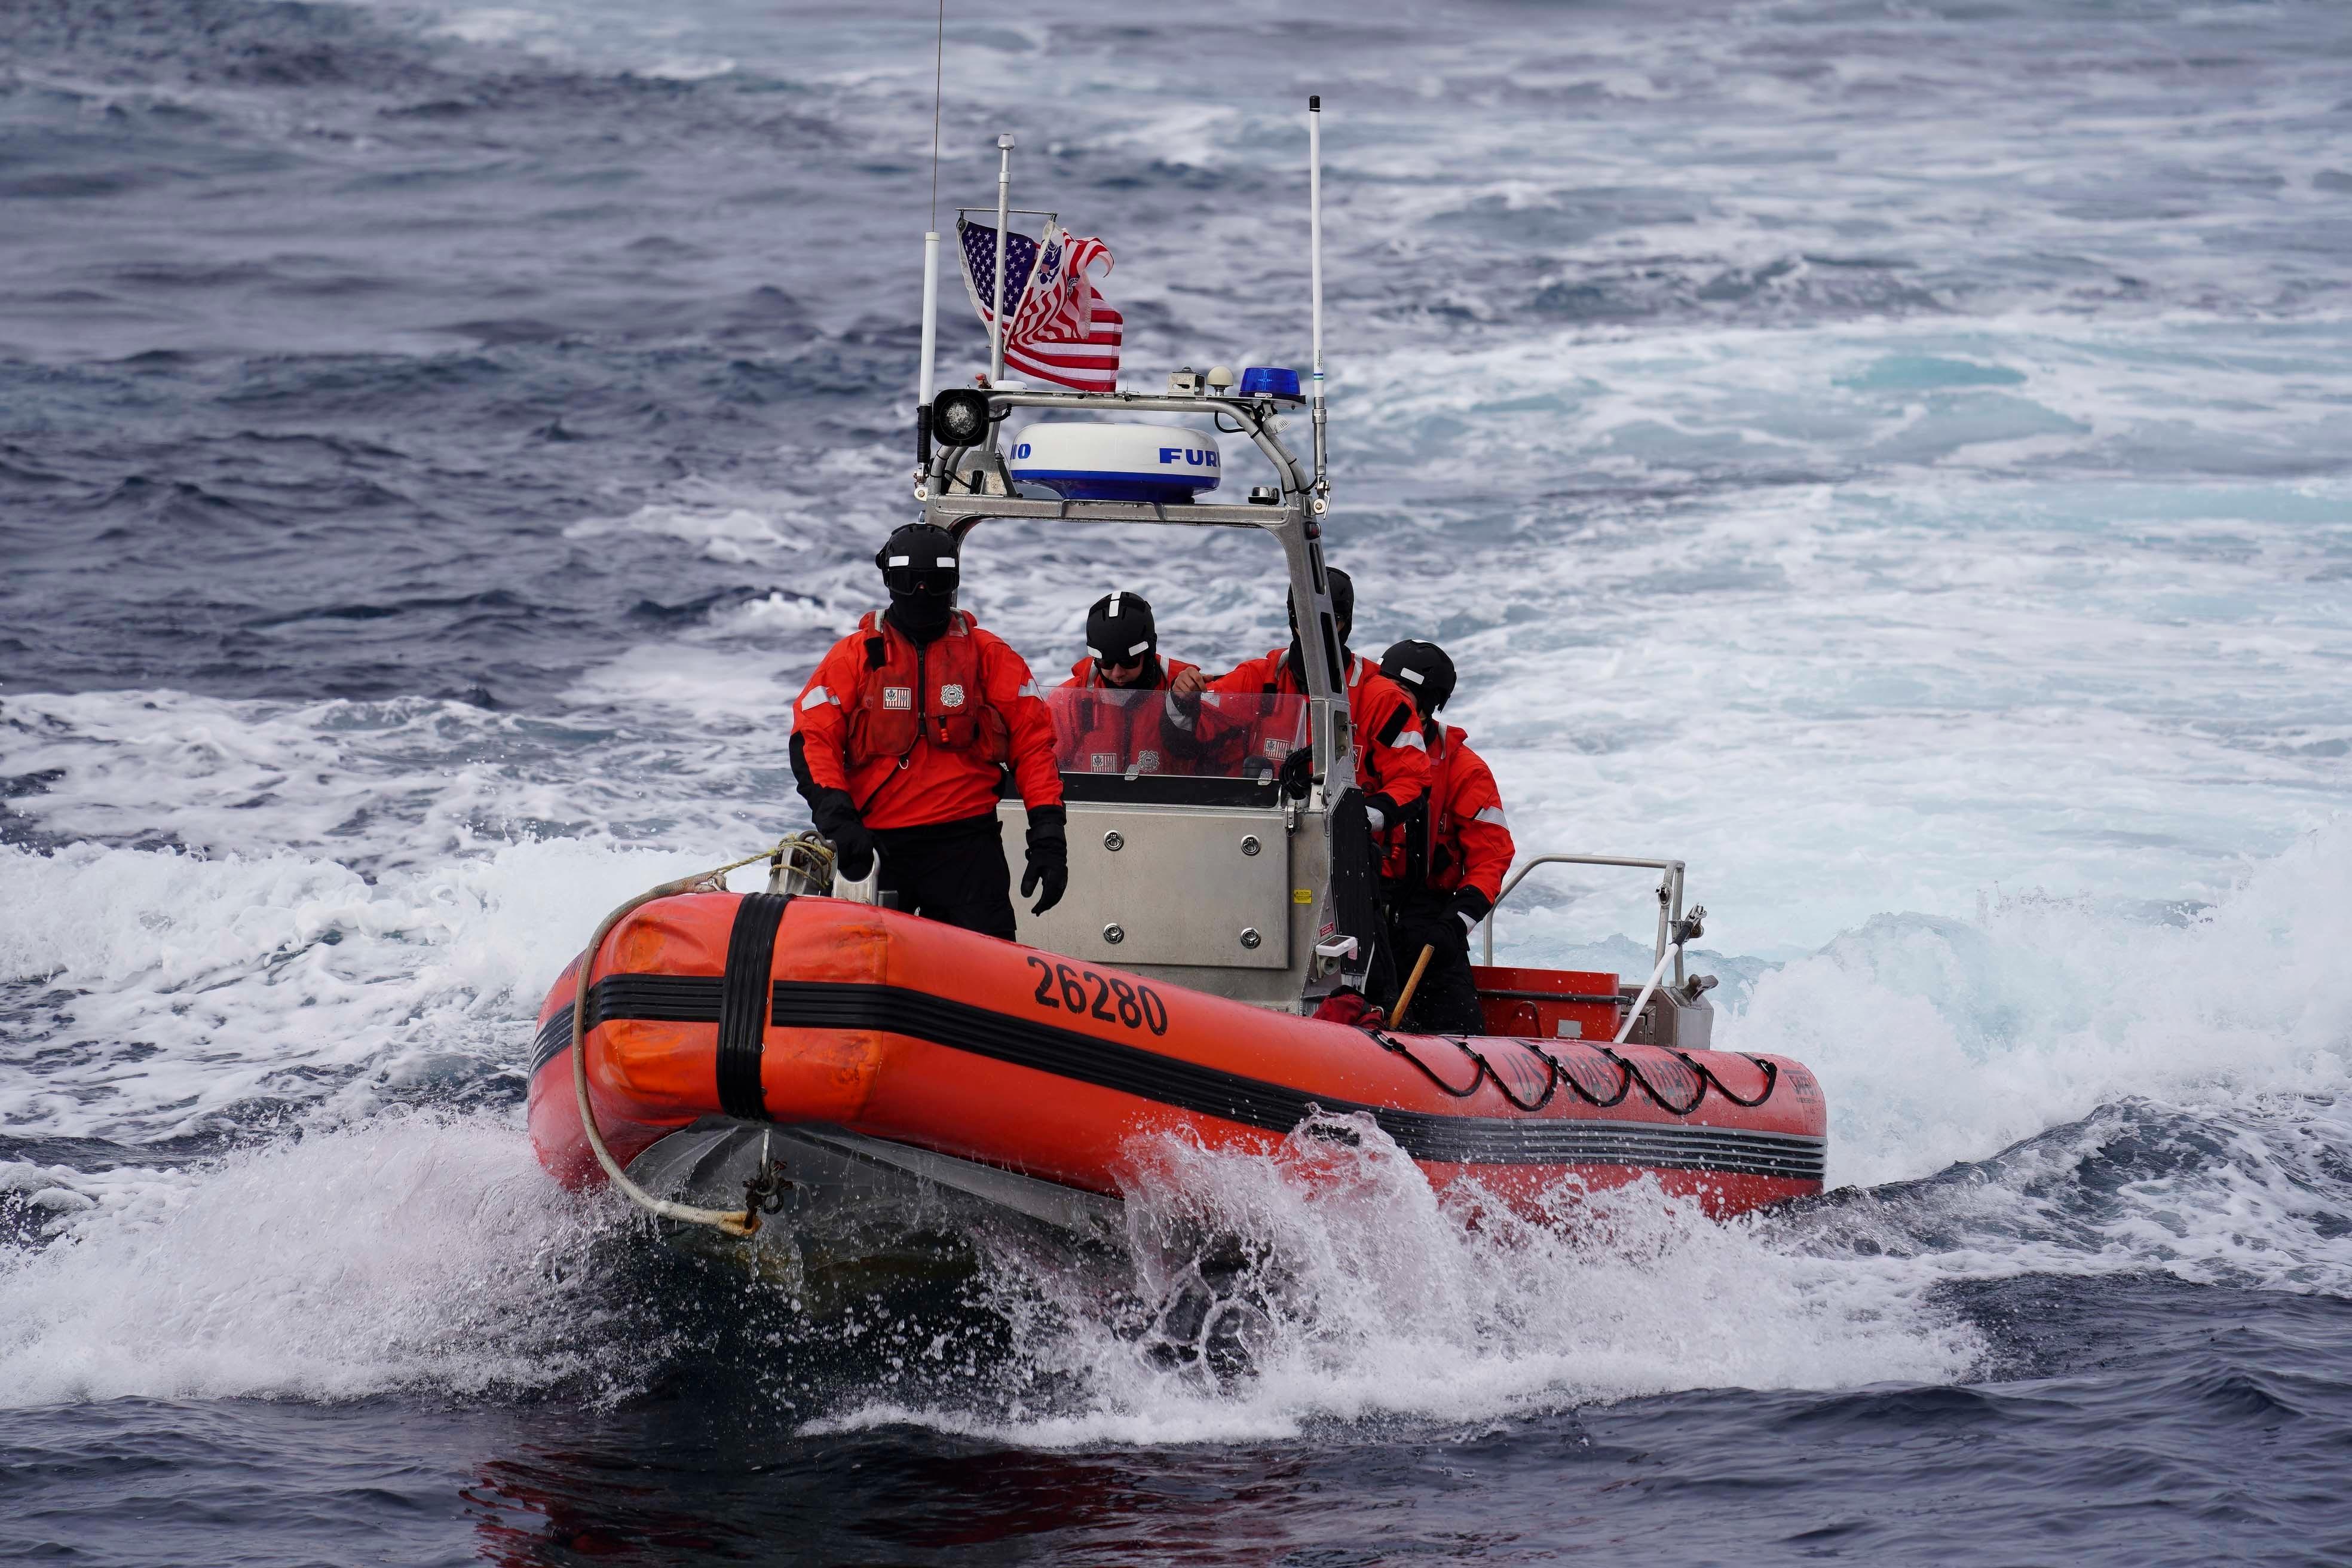 As part of Operation Nanook, U.S. Coast Guard Cutter Tahoma (WMEC 908) boat-crew participates in a search and rescue exercise with the HDMS Triton, a Royal Danish navy vessel, Aug. 17, 2020, off Greenland. Operation Argus, part of Nanook, focused on search and rescue interoperability, highlights the importance of cooperation between international partners. (U.S. Coast Guard photo by Seaman Kate Kilroy/Released)